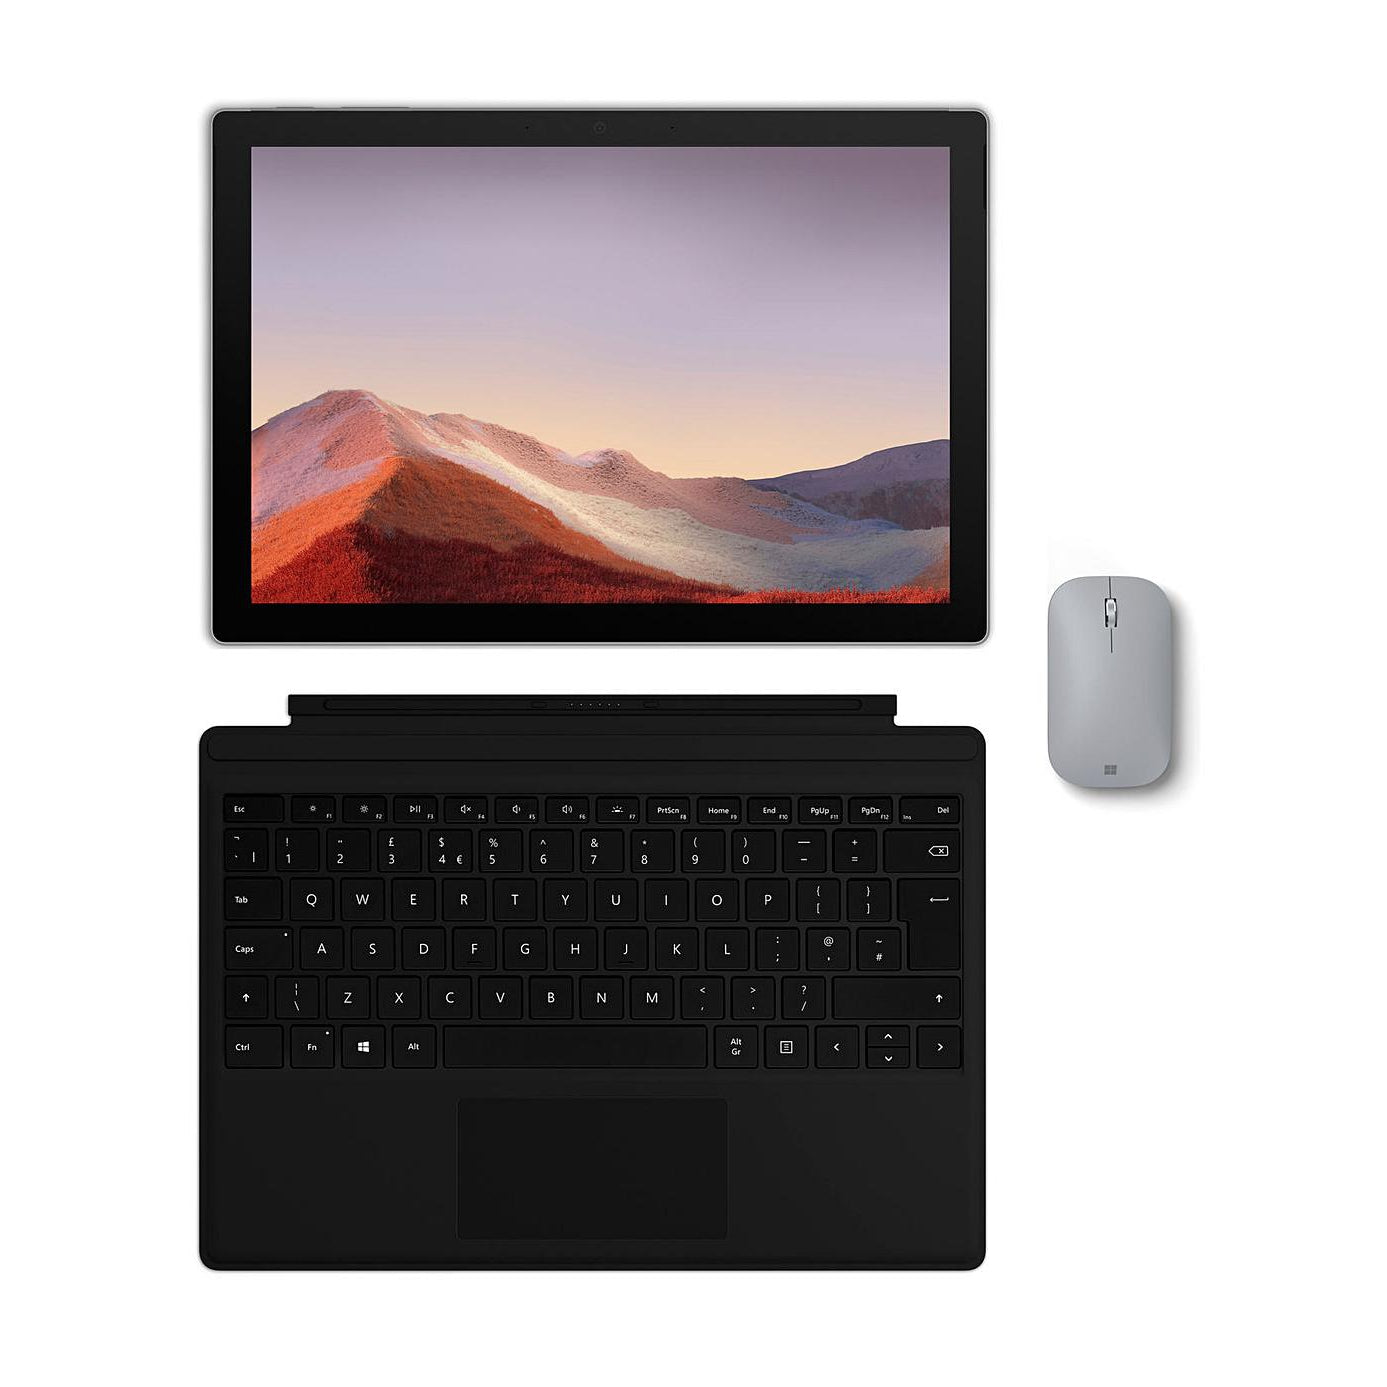 Microsoft Surface Pro 7 Laptop - 12.3 inch, Intel Core i3, 4GB RAM, 128GB SSD, Keyboard and Wireless Mouse Included - Platinum